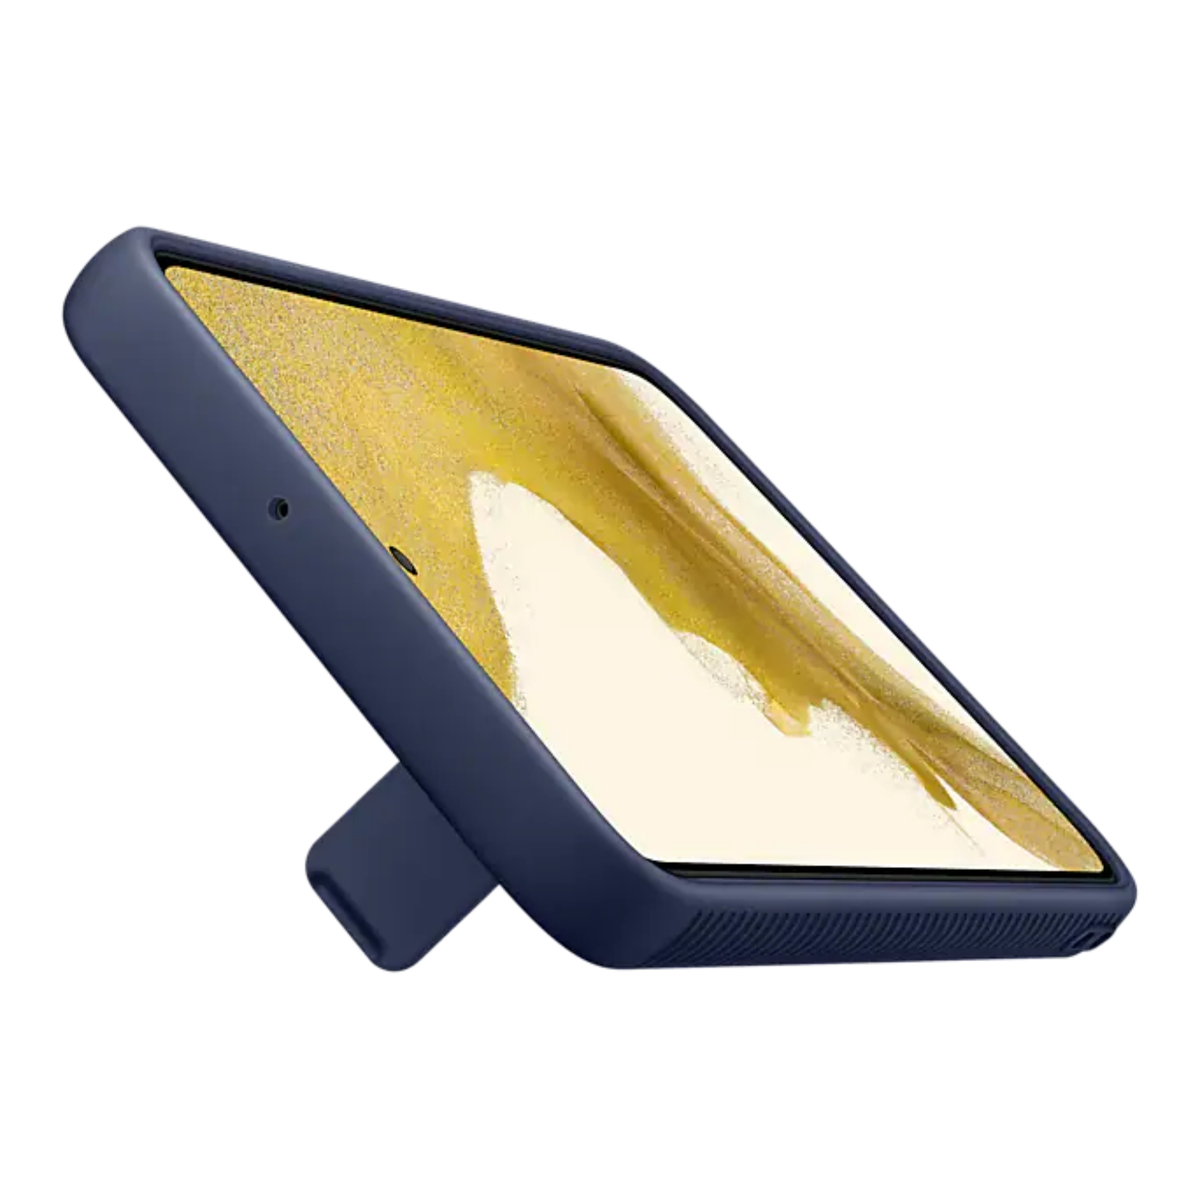 Samsung Protective Standing Cover for Galaxy S22+, Navy, EF-RS906CNEGWW